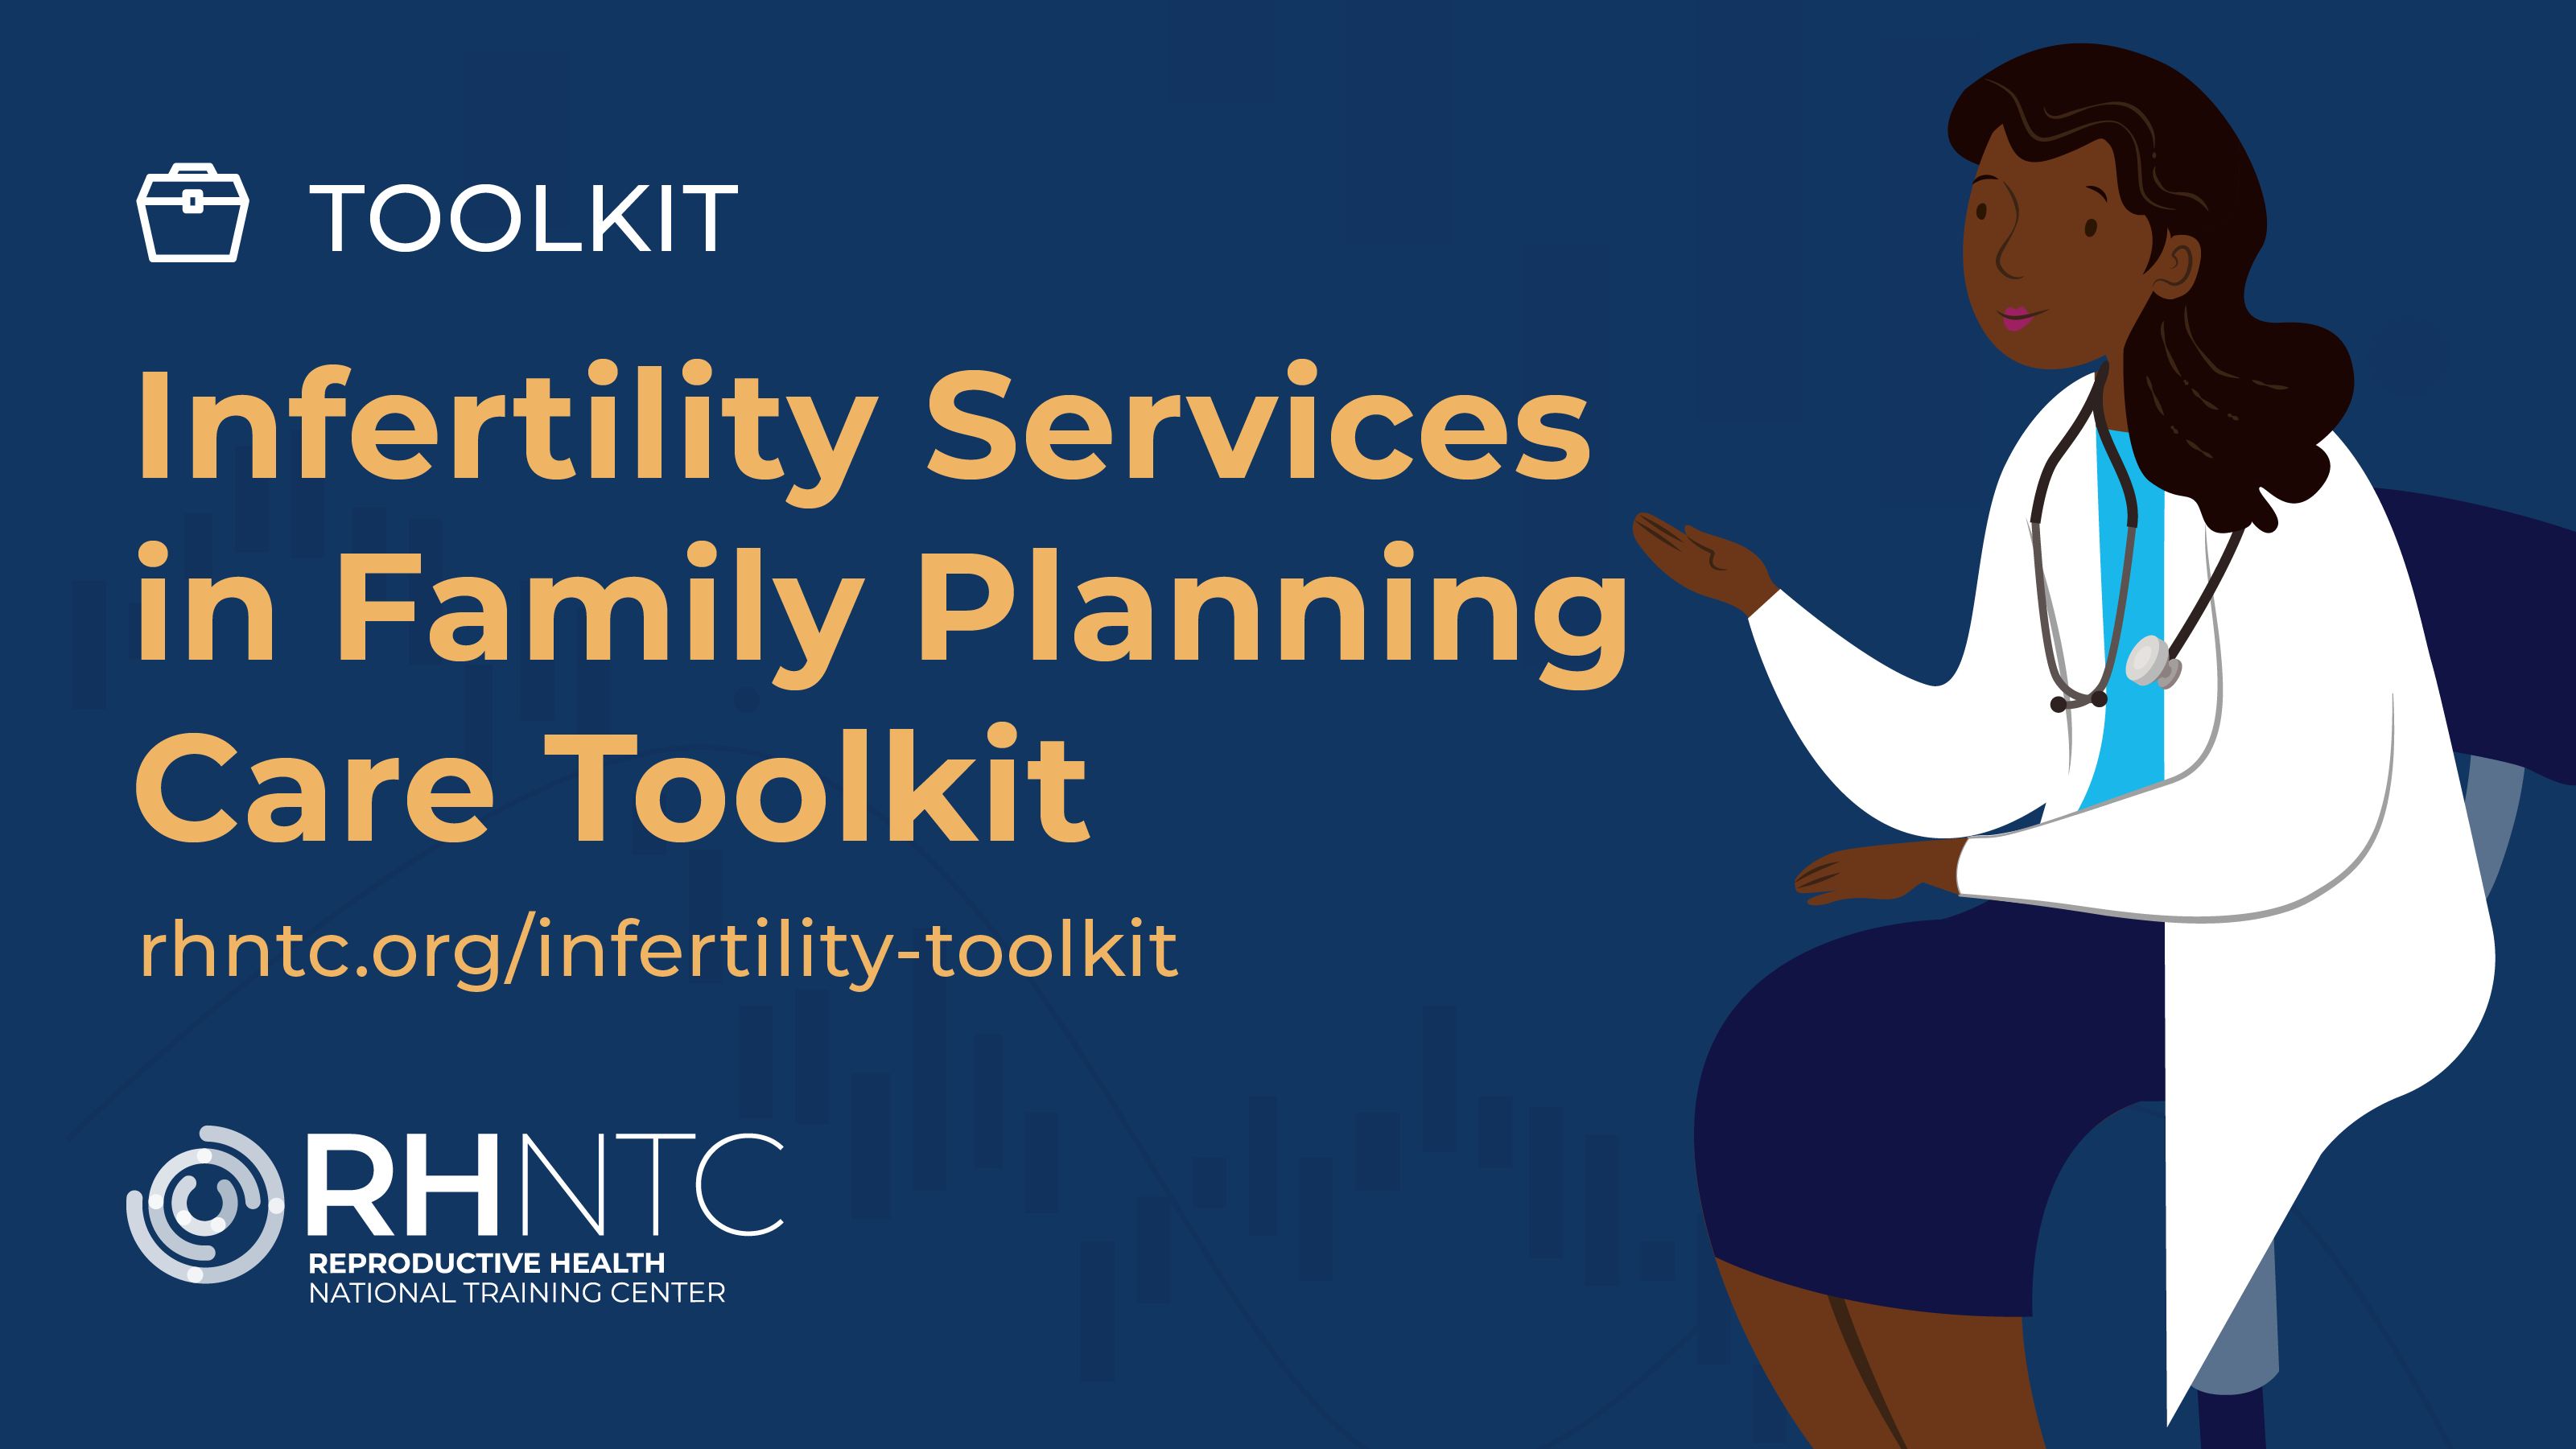 Toolkit: Infertility Services in Family Planning Care Toolkit. rhntc.org/infertility-toolkit